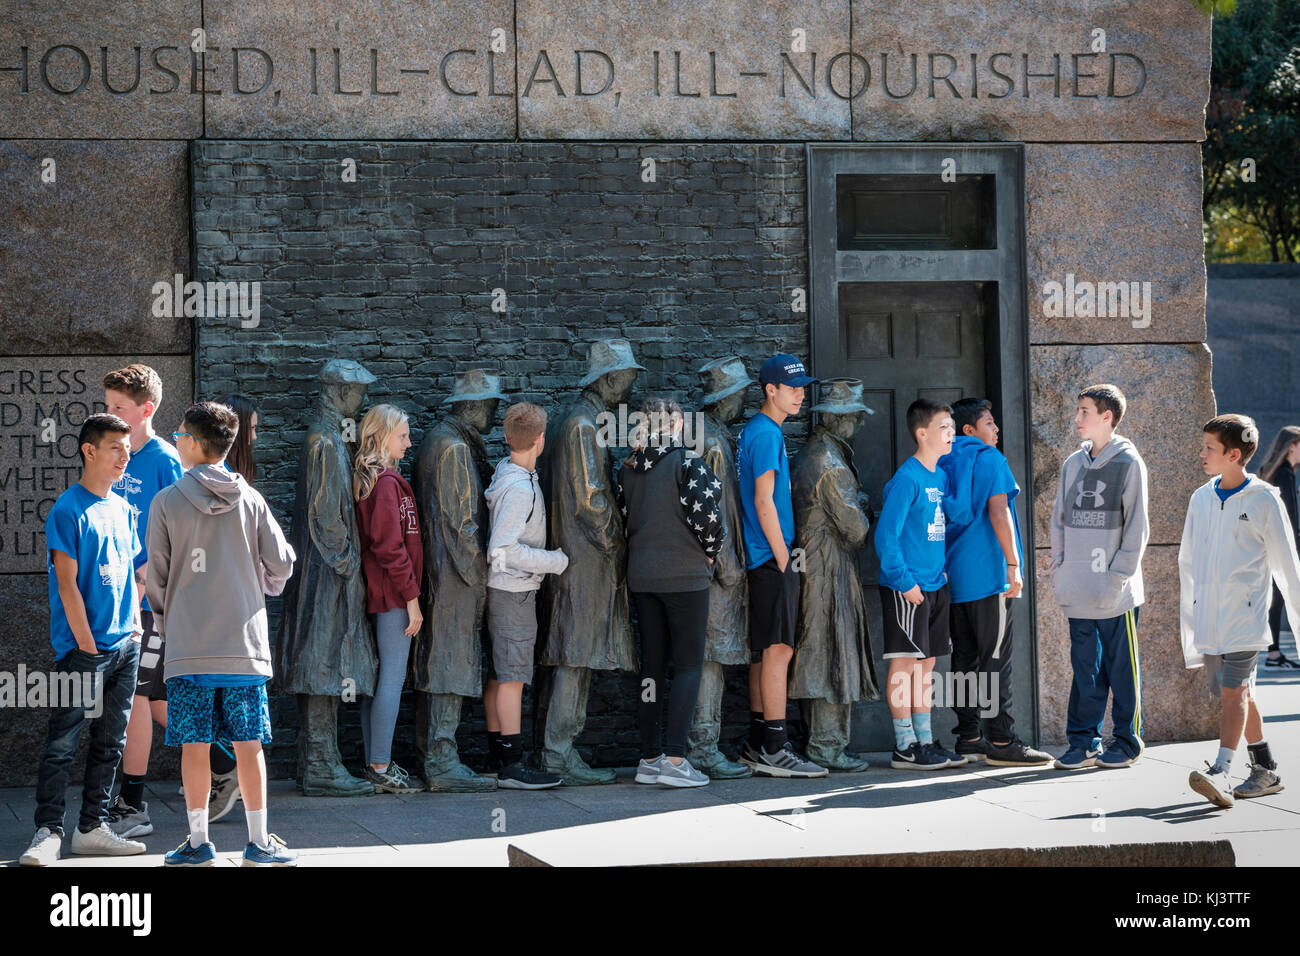 Young students posing, Bread Line, sculpture by George Segal, Room Two of Franklin Delano Roosevelt Memorial, Washington, D.C., United States of Ame Stock Photo